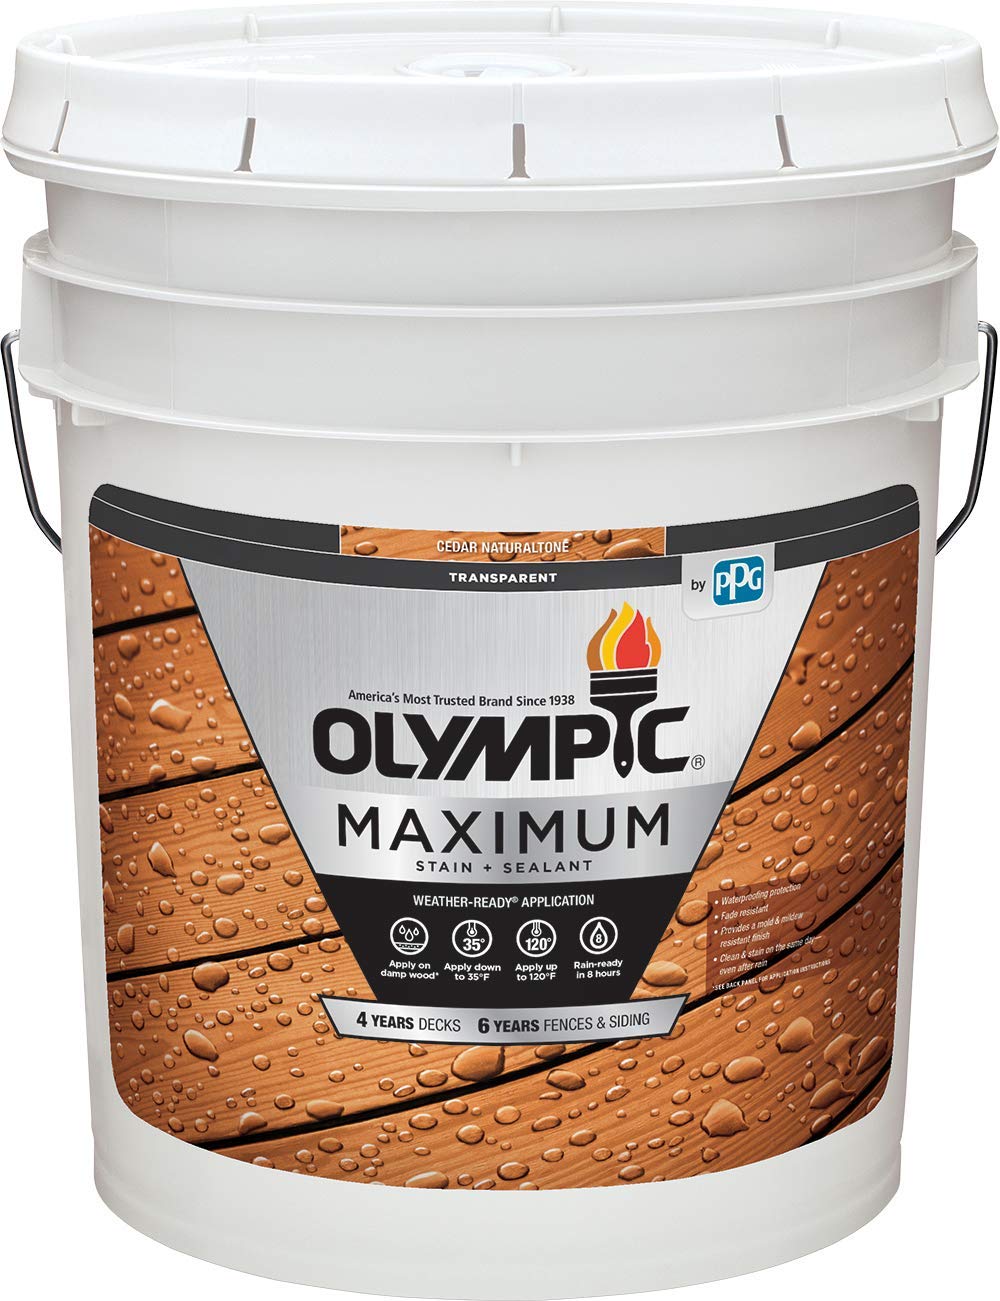 Olympic Maximum Wood Stain And Sealer For Decks, [...]